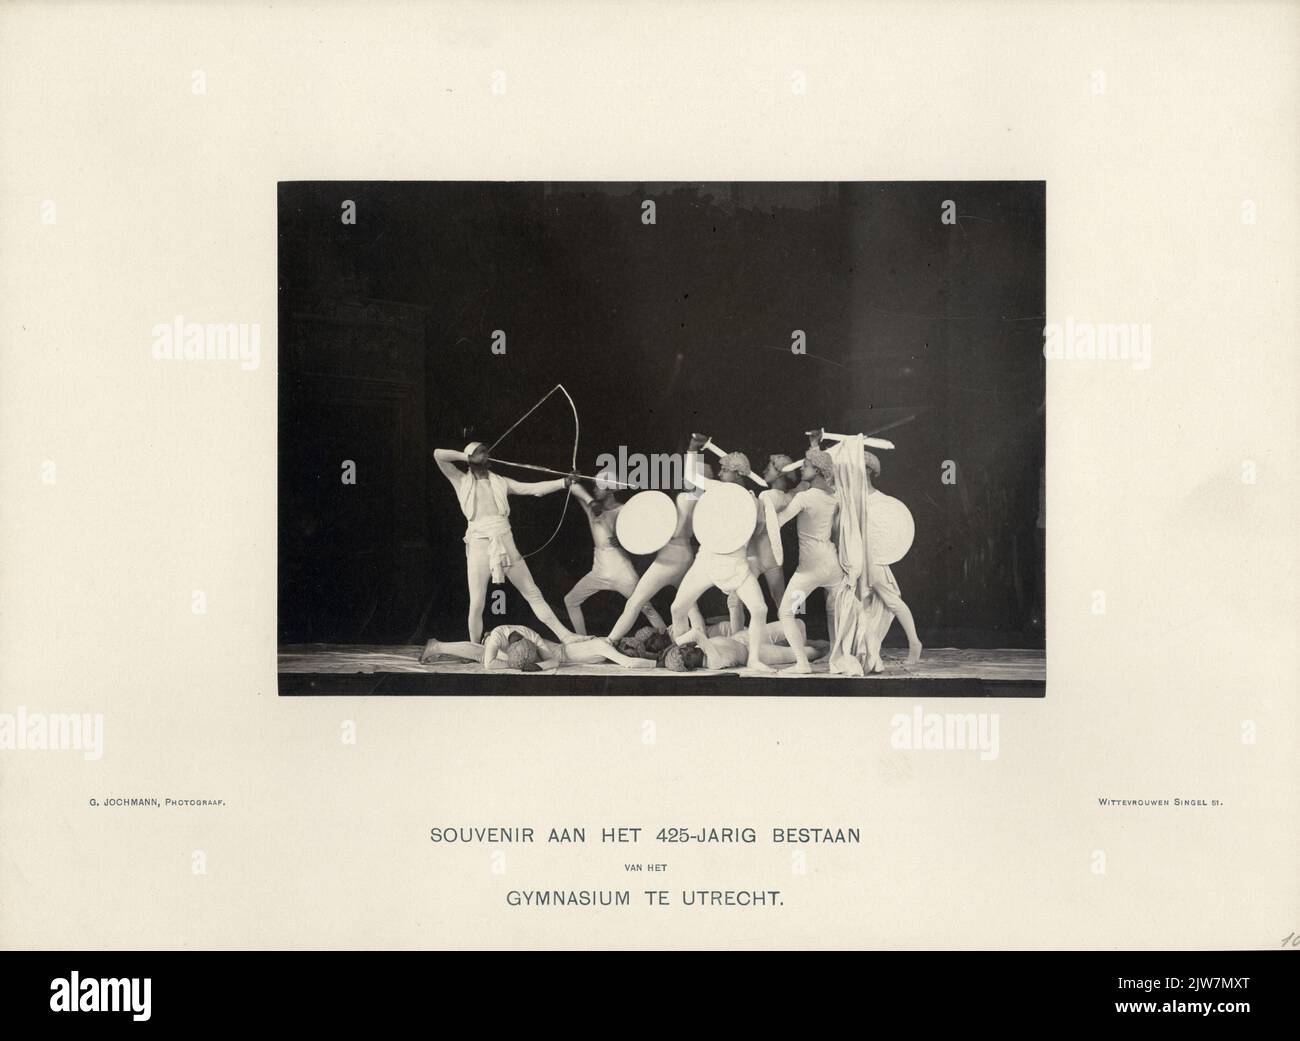 Image of a marble sculpture group performed by students from the Stedelijk Gymnasium in Utrecht in the large hall of building Tivoli (Kruisstraat 1) in Utrecht, after the Toneel version Miles Gloriosus at the 425th anniversary of the school. Stock Photo